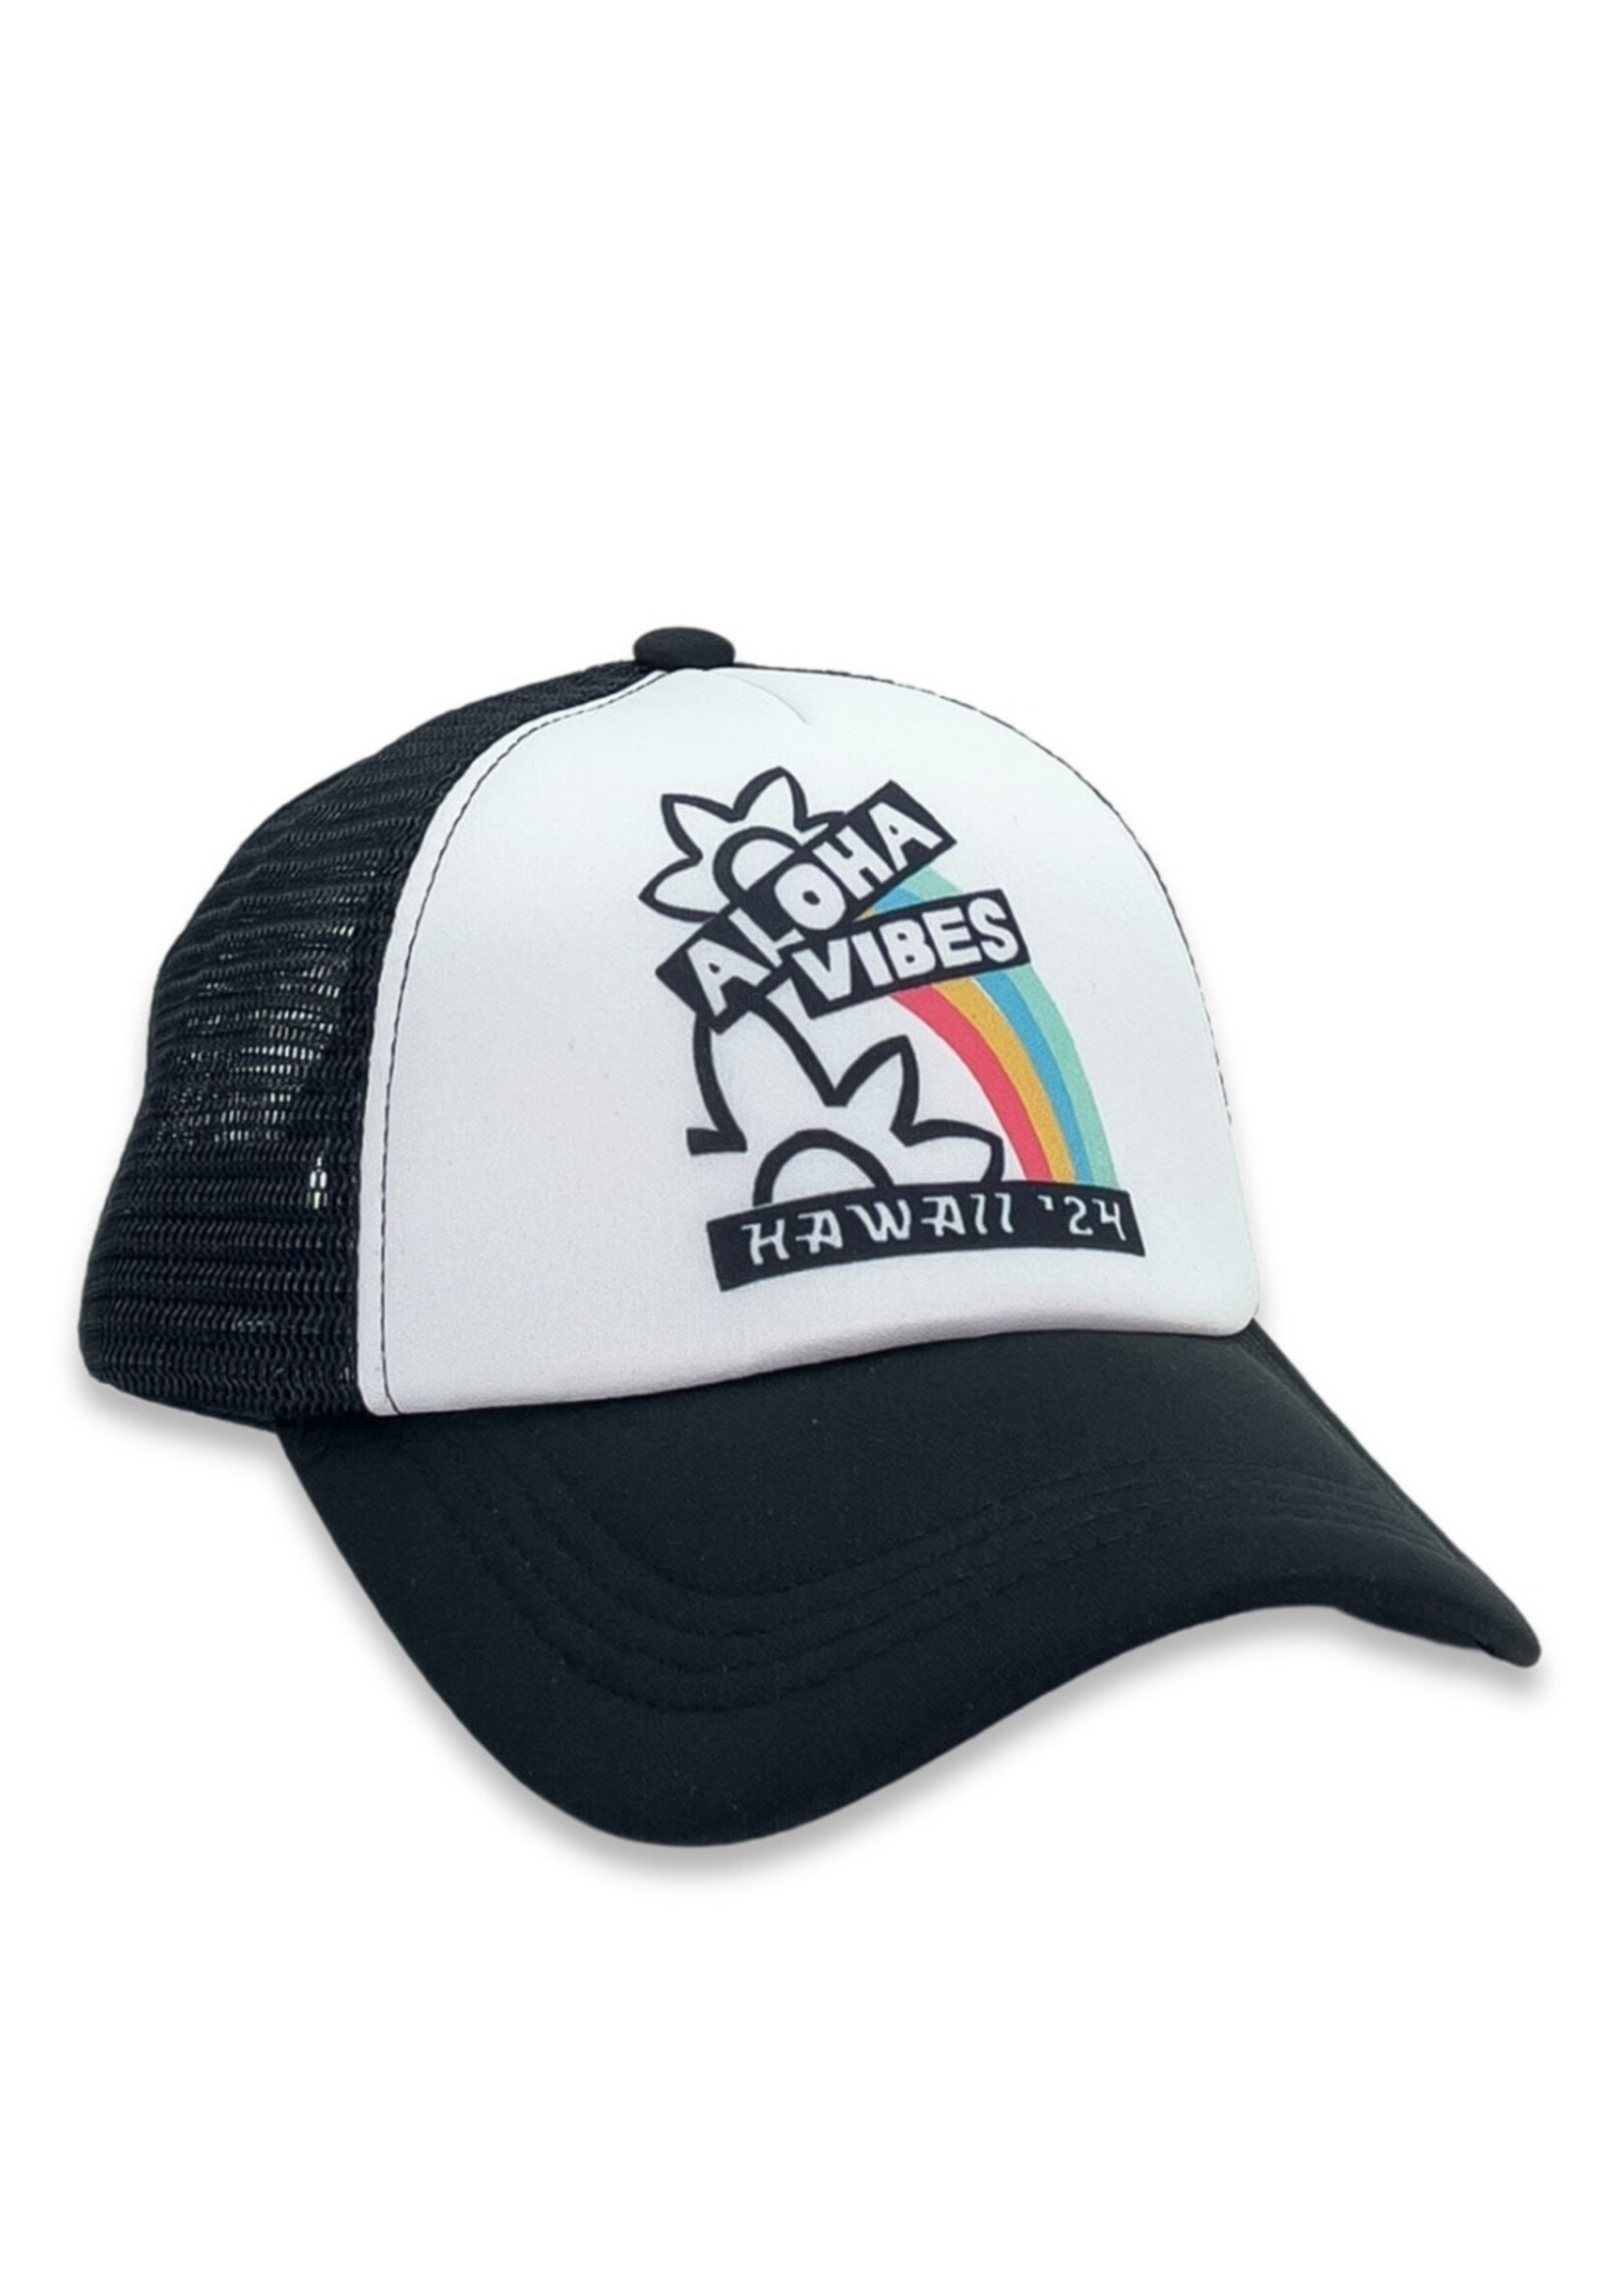 Feather 4 Arrow Feather 4 Arrow, Aloha State of Mind Trucker Hat || Black / White